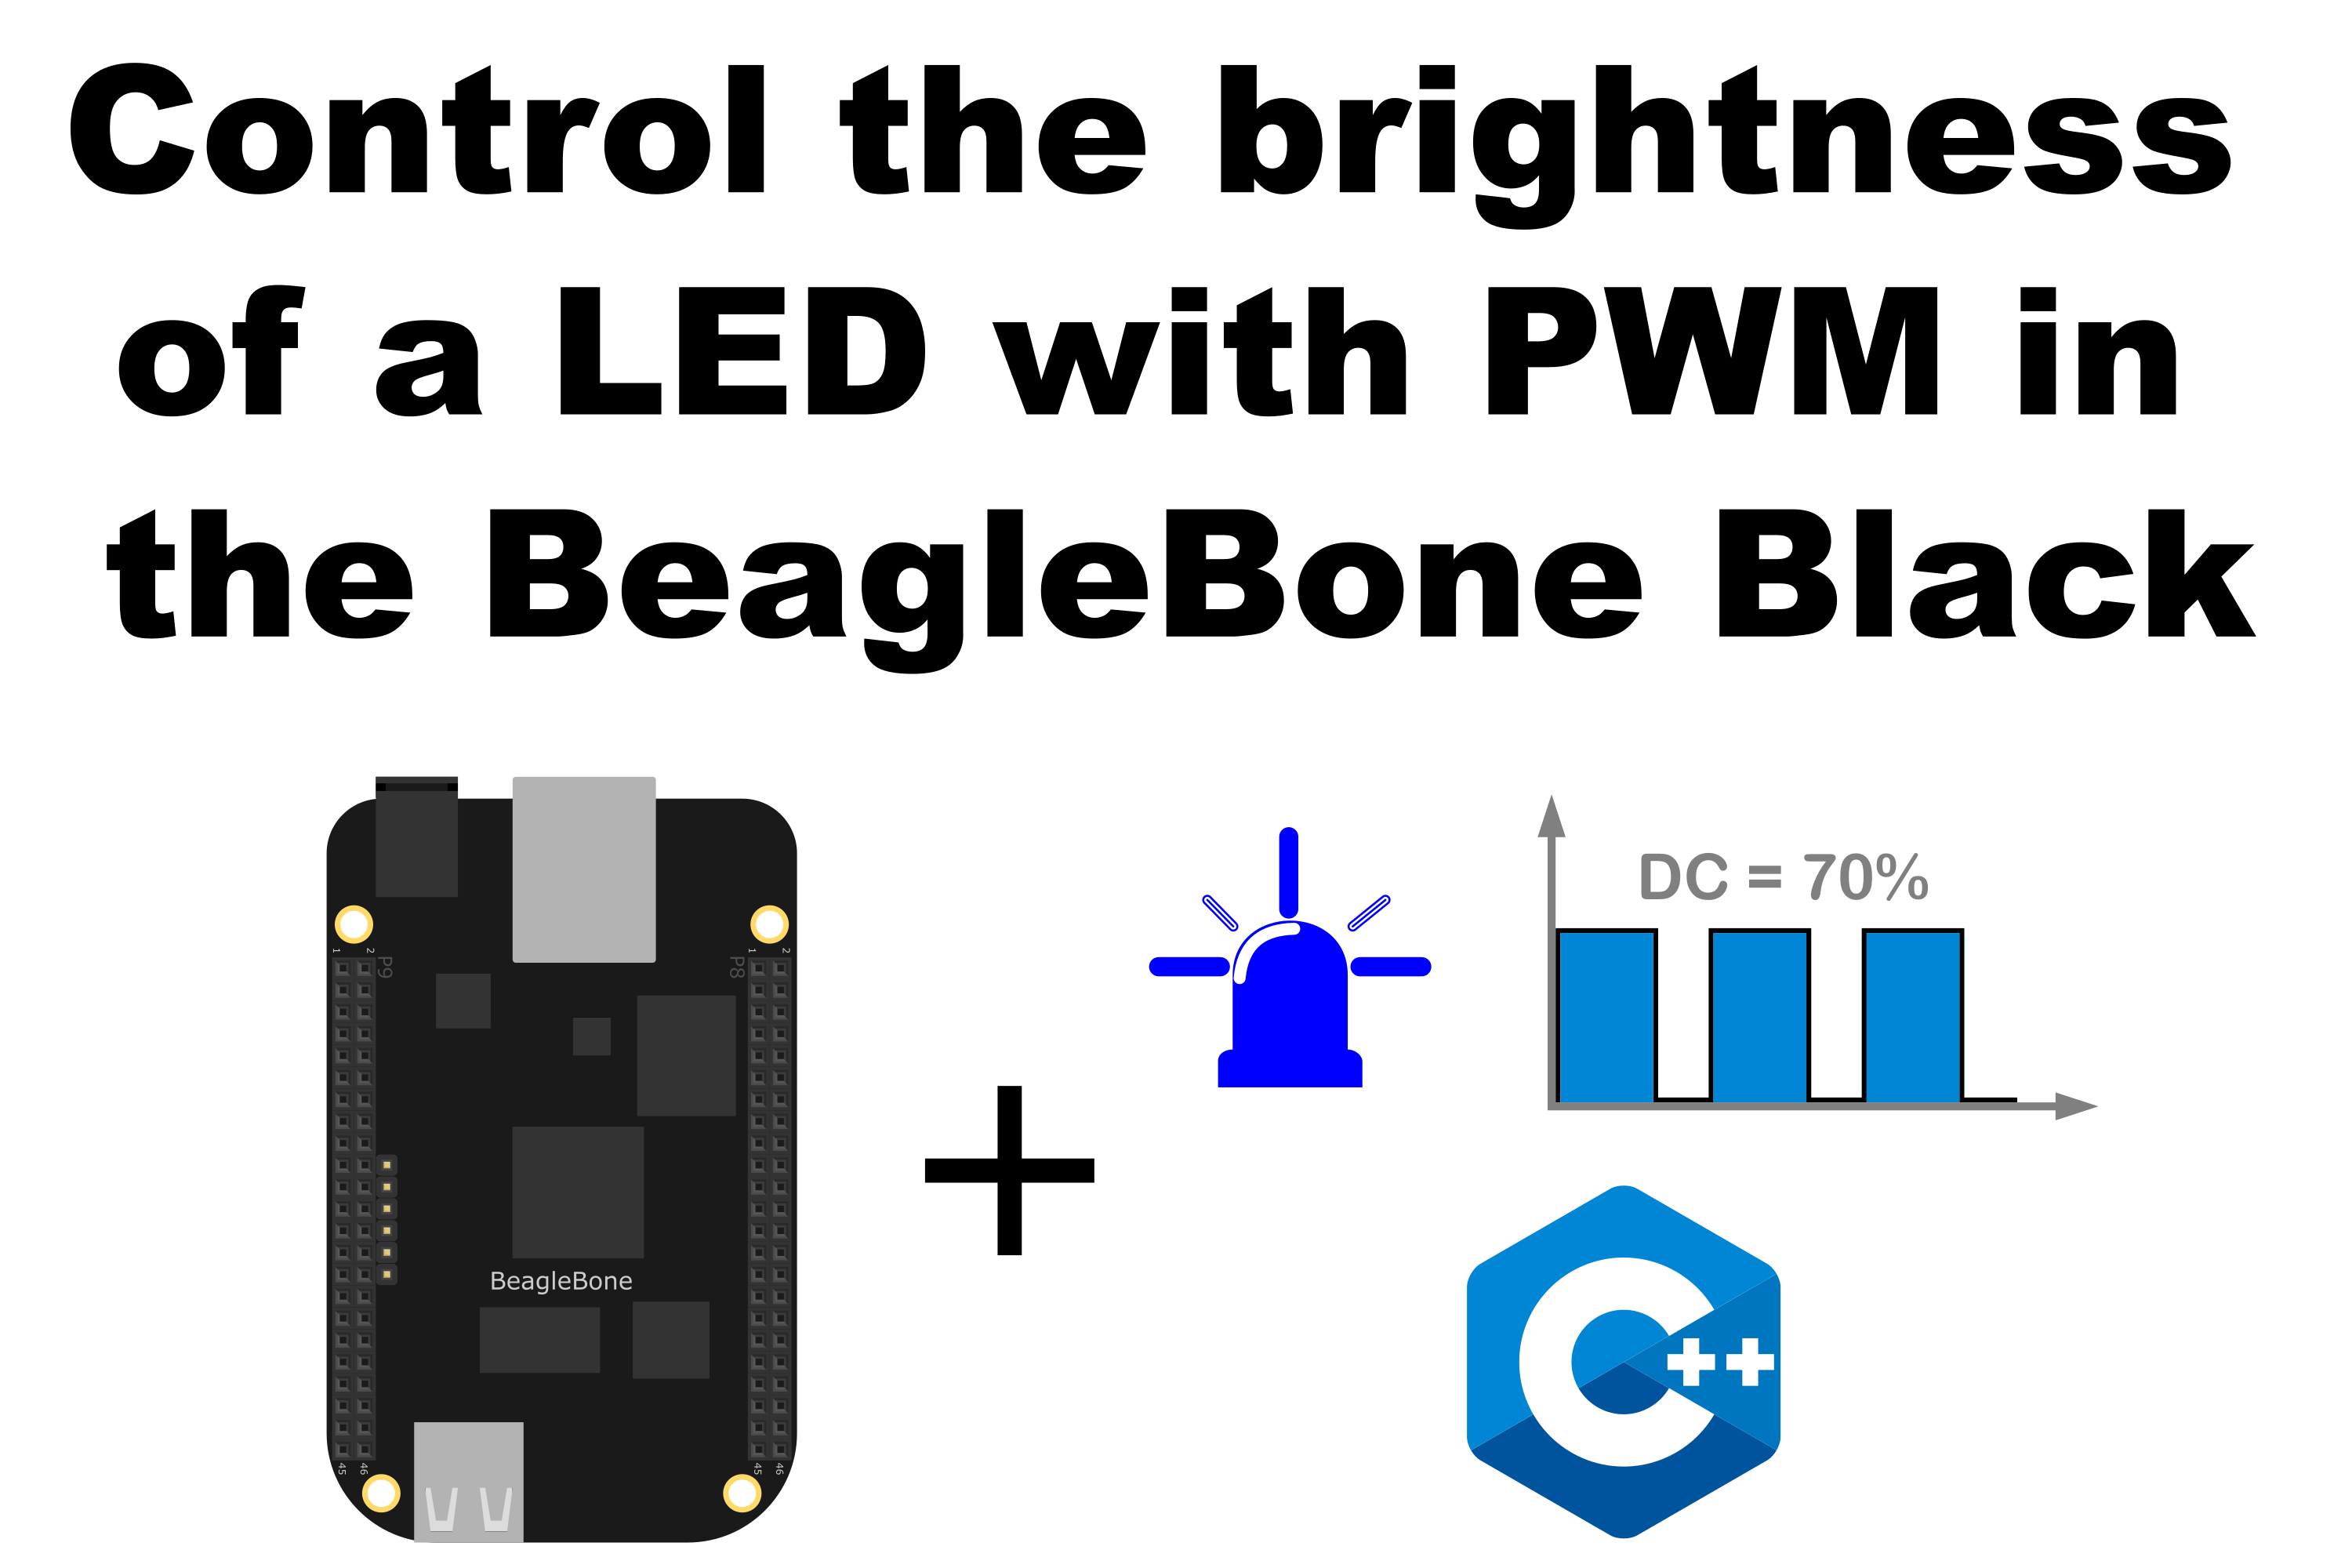 Control the brightness of a LED with PWM in the BeagleBone Black